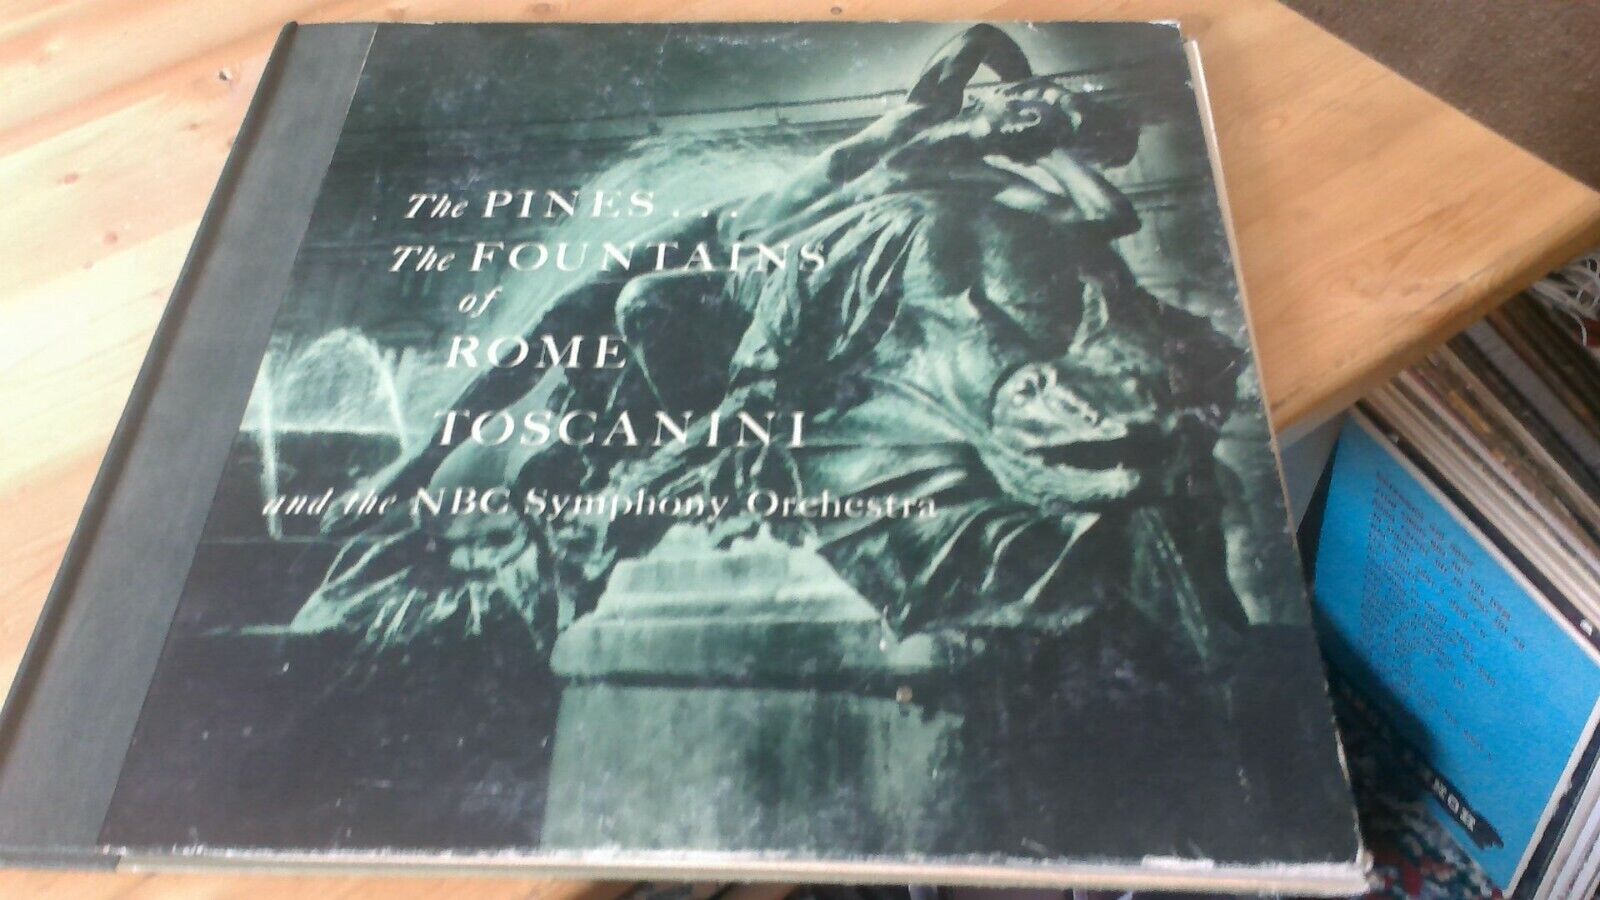 Toscanini/NBC Symphony - Respighi. Fountains/Pines of Rome, RCA LM-1768 VG book